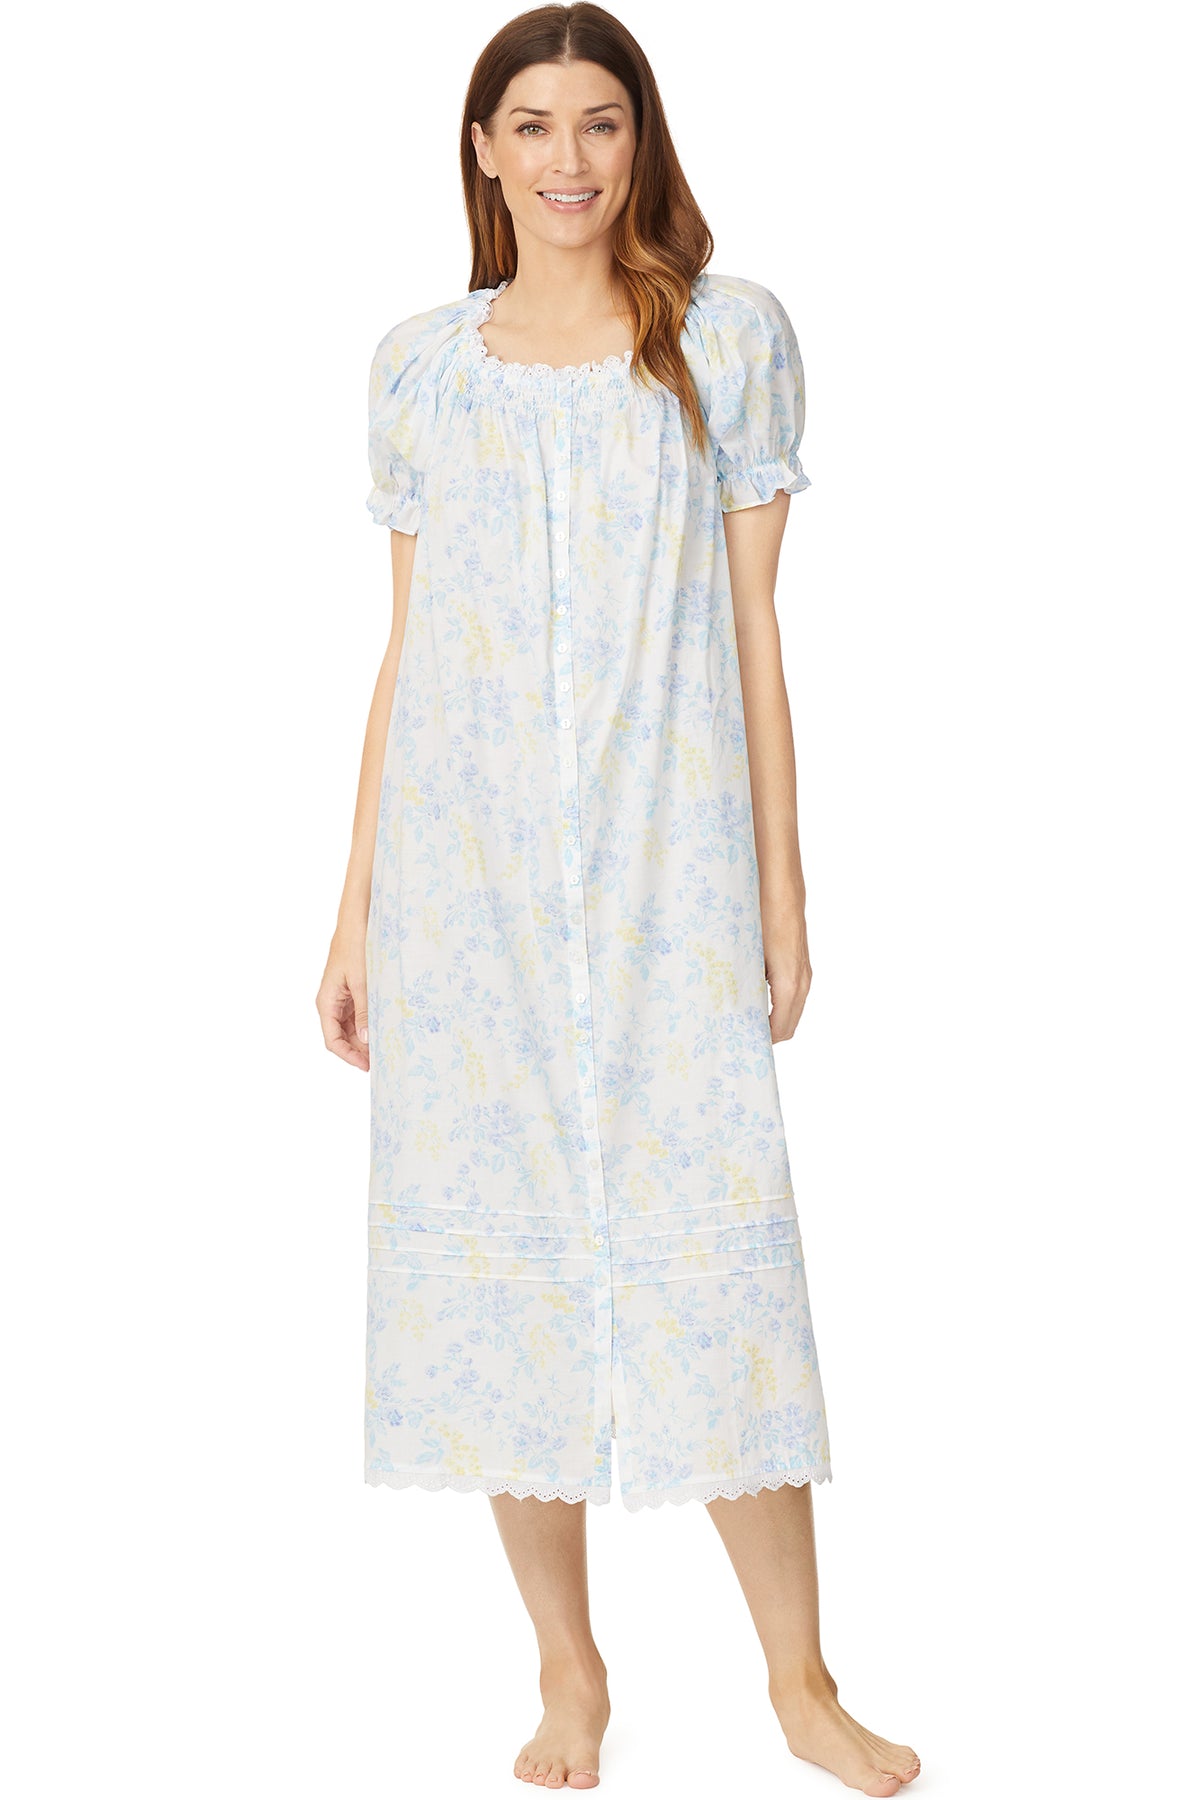 A lady wearing a white cap sleeve long nightdress with a multi colour floral pattern.